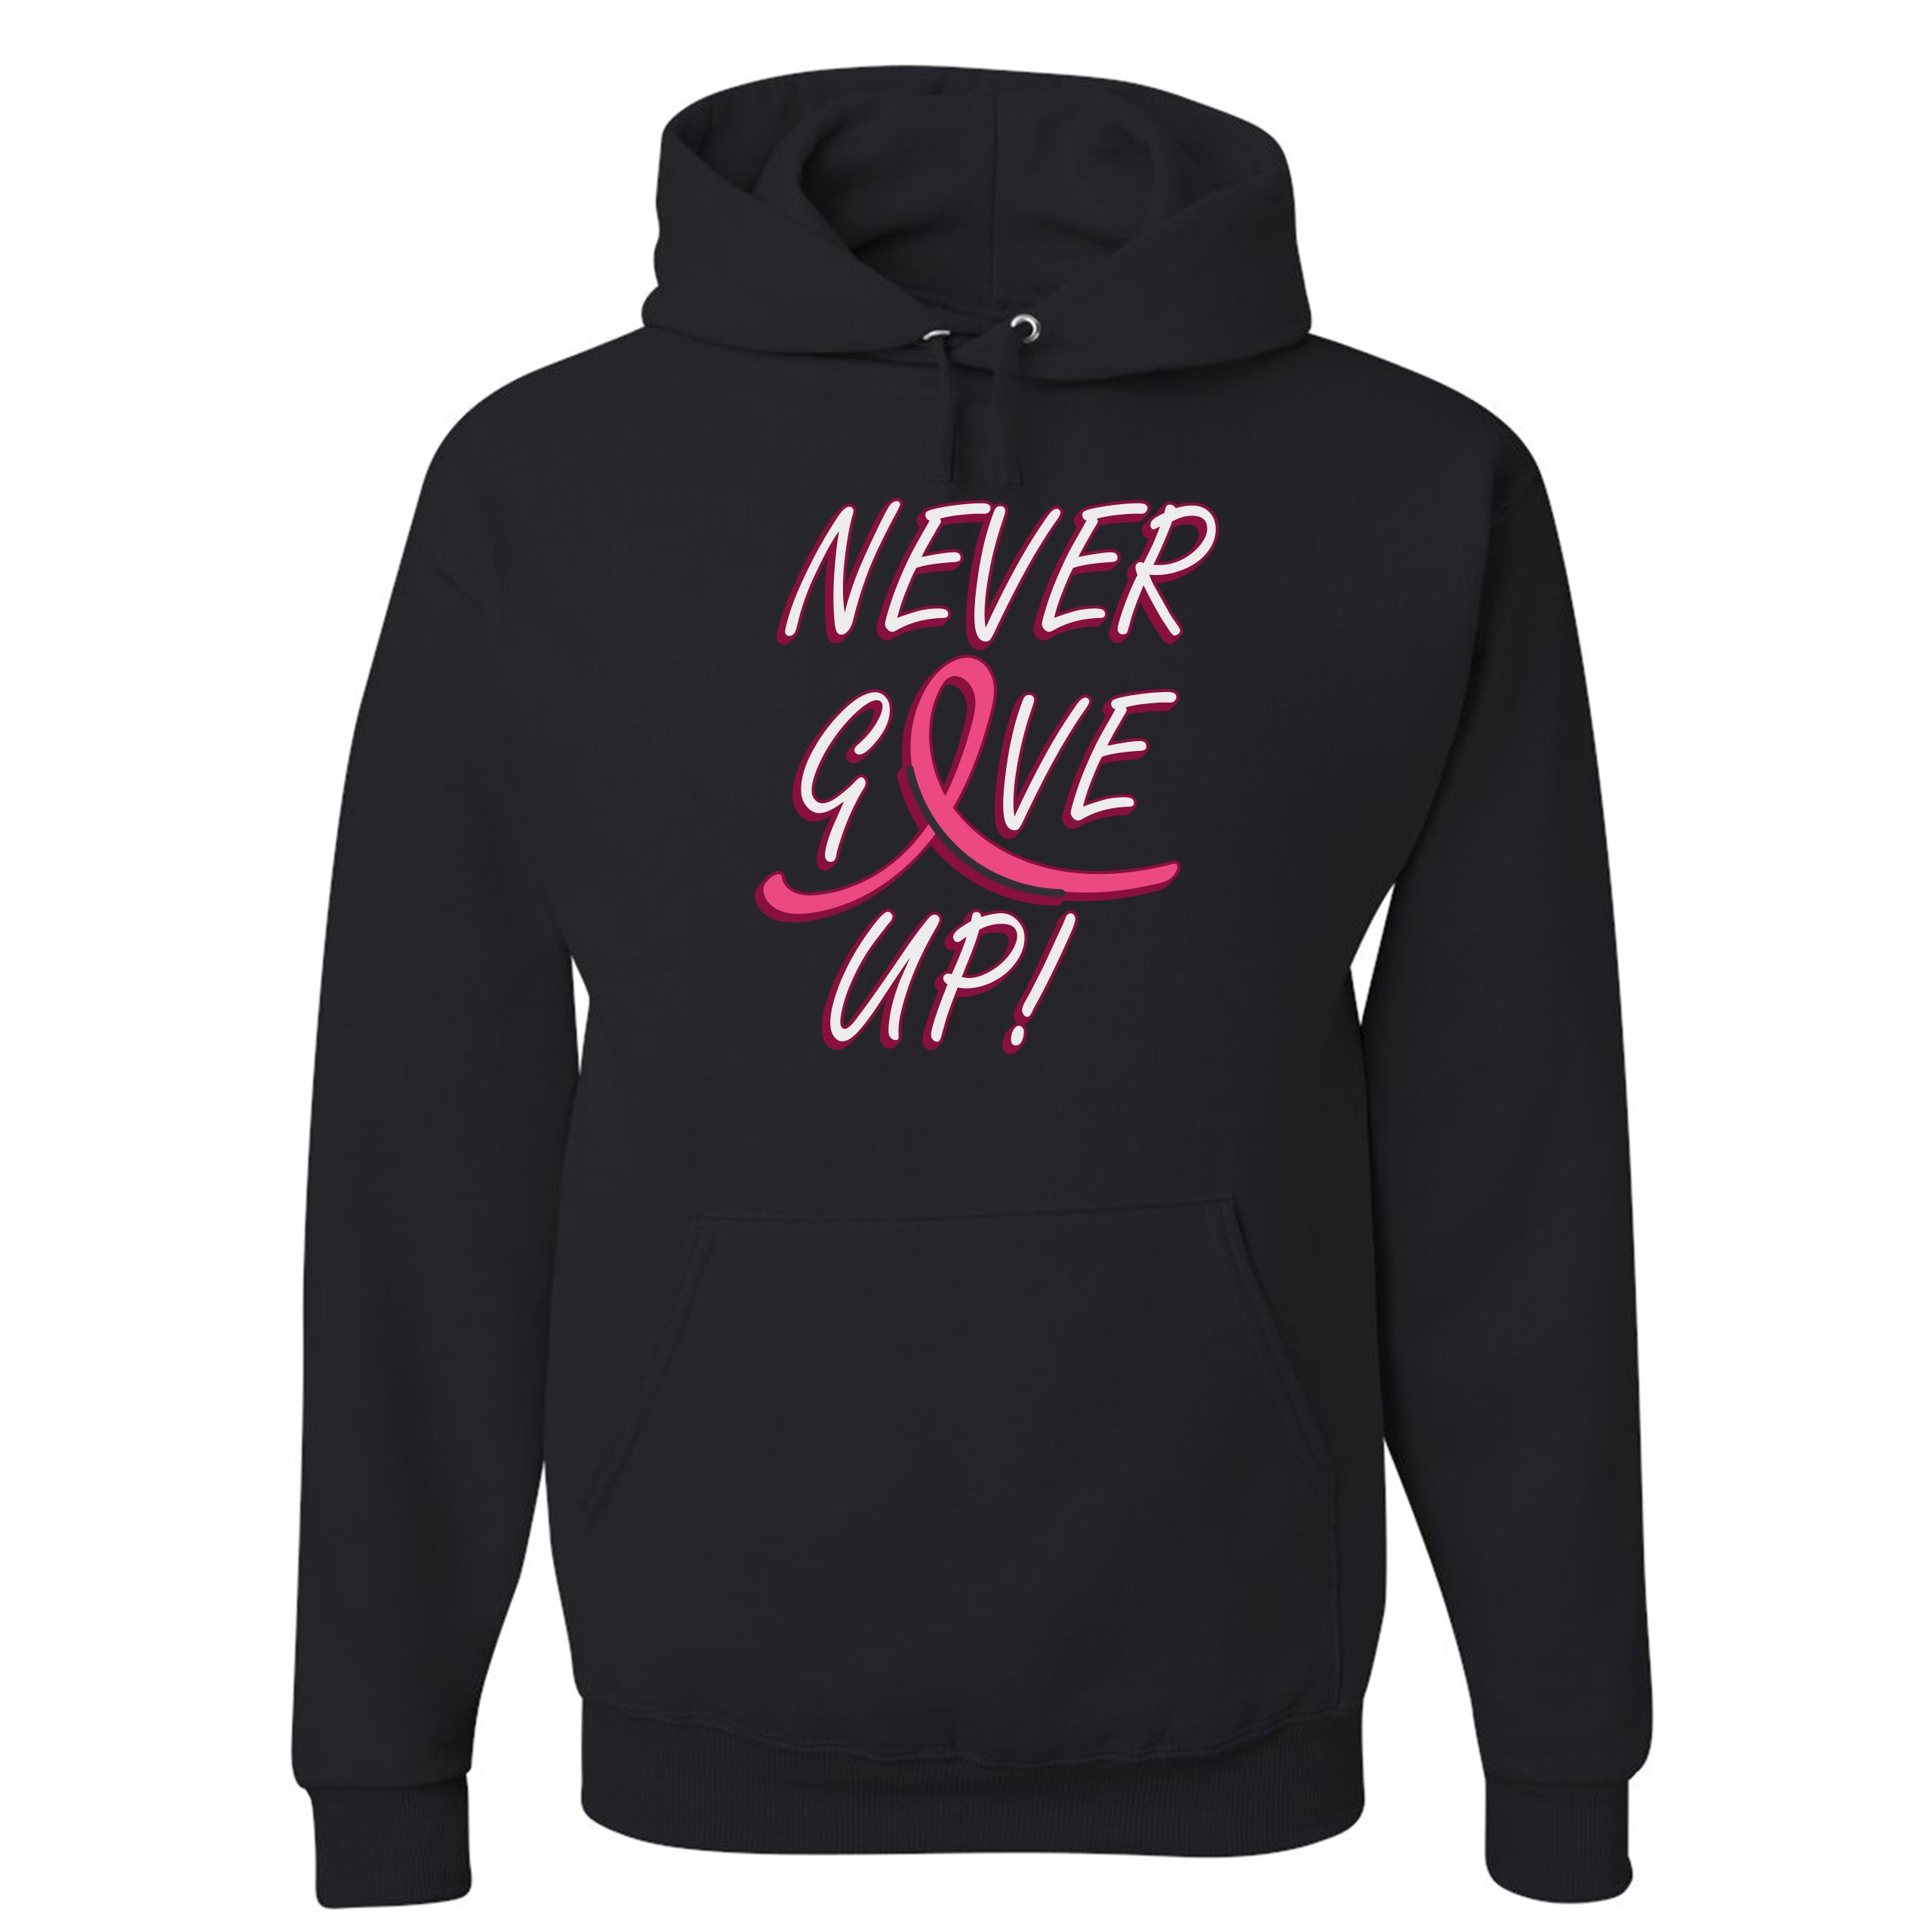 Breast Cancer Awareness Never Give Up Sweatshirt Pink Ribbon Hoodie | eBay